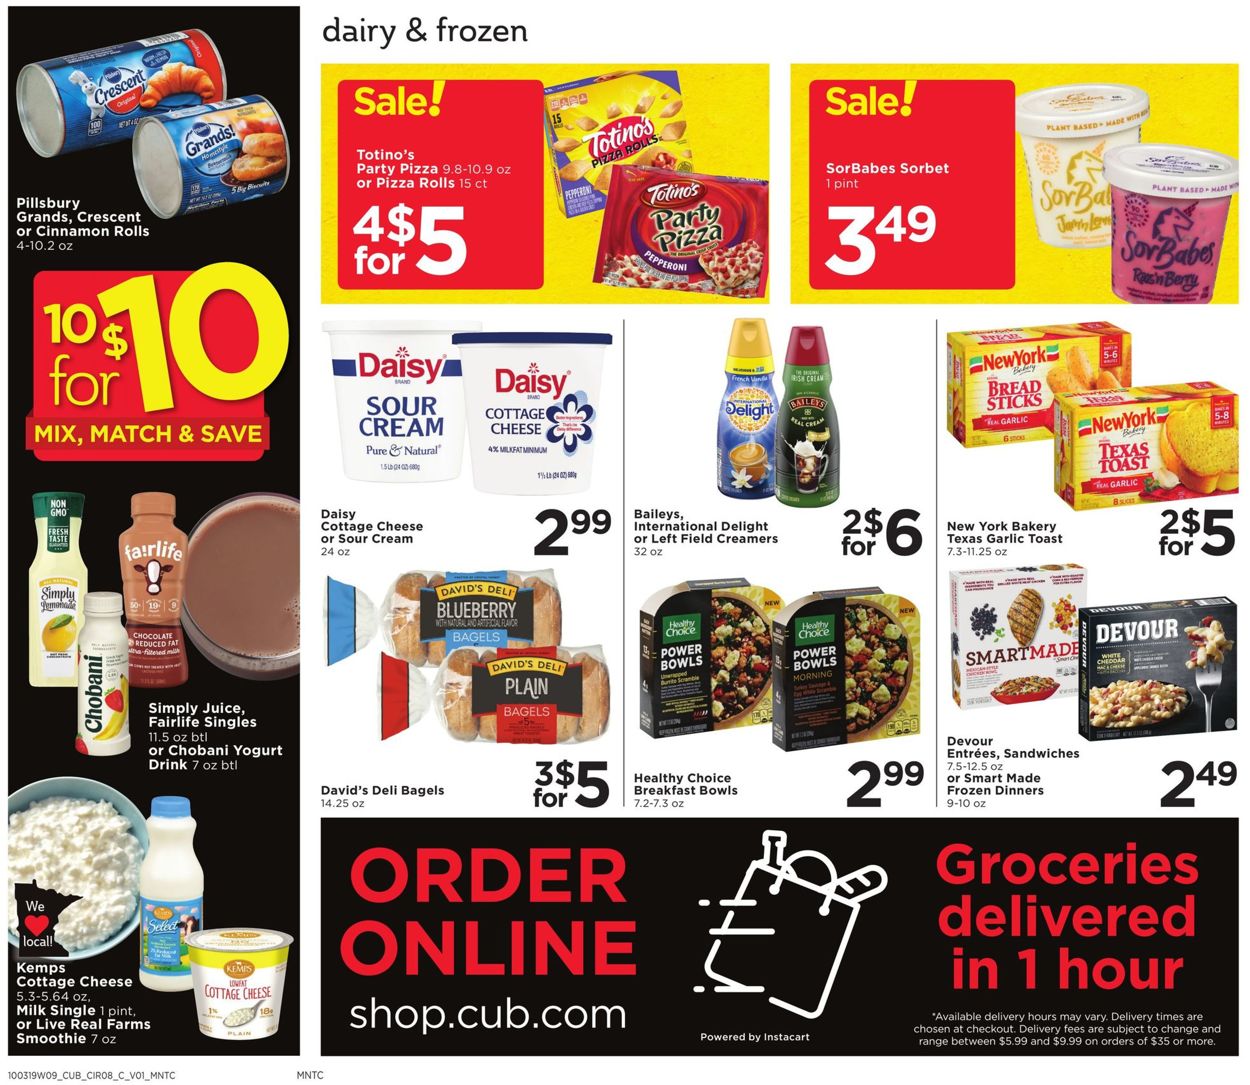 Catalogue Cub Foods from 10/03/2019